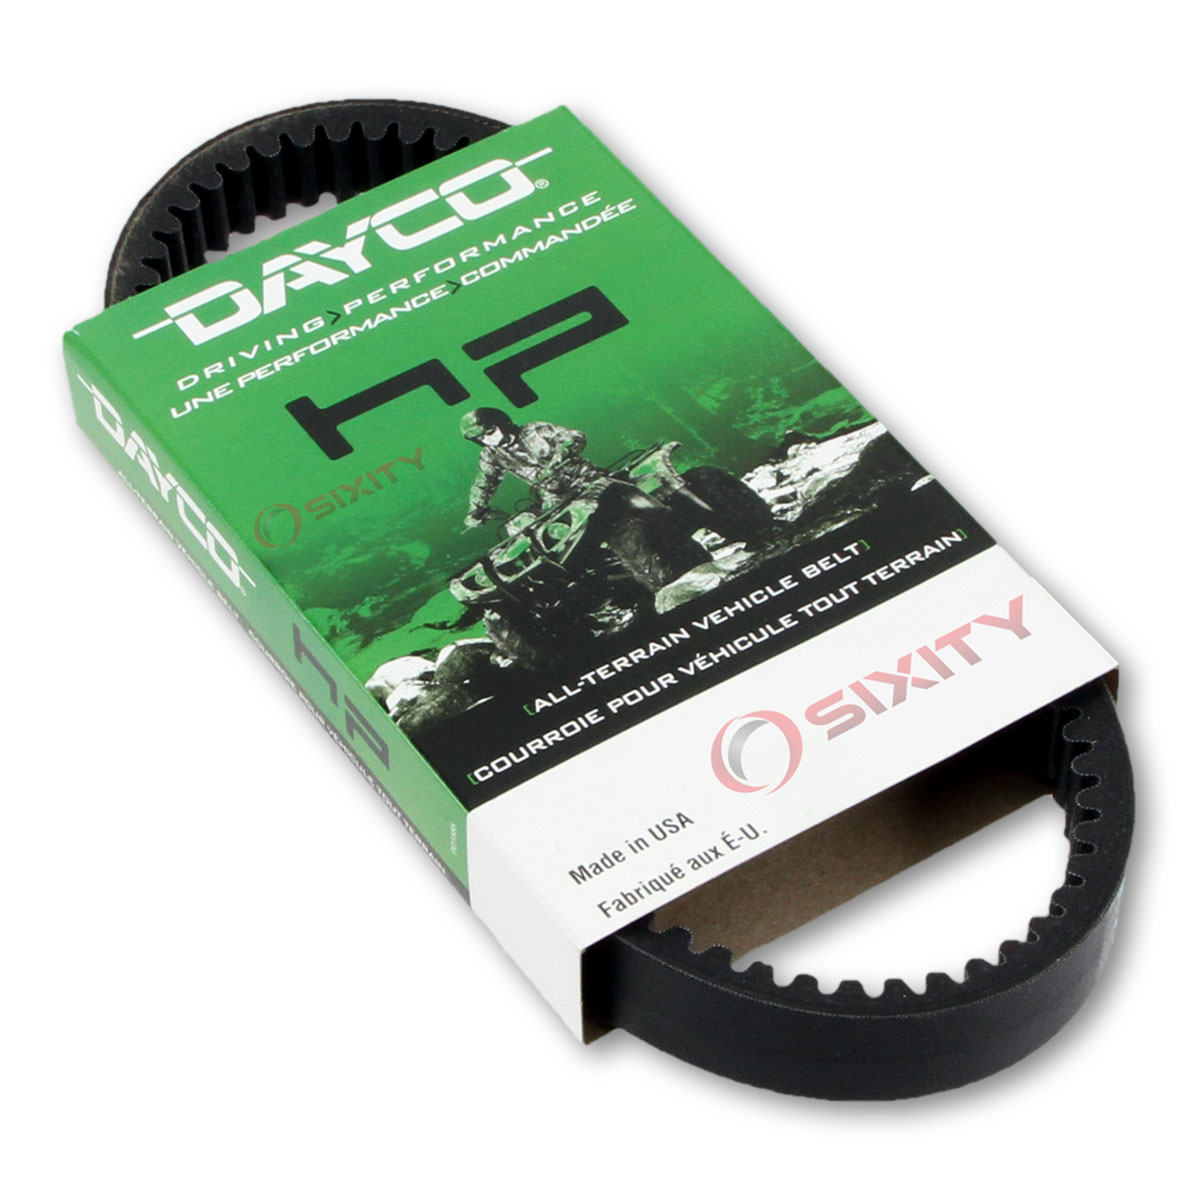 Dayco HP Drive Belt for 2002-2008 Arctic Cat 400 4x4 Auto - High Performance